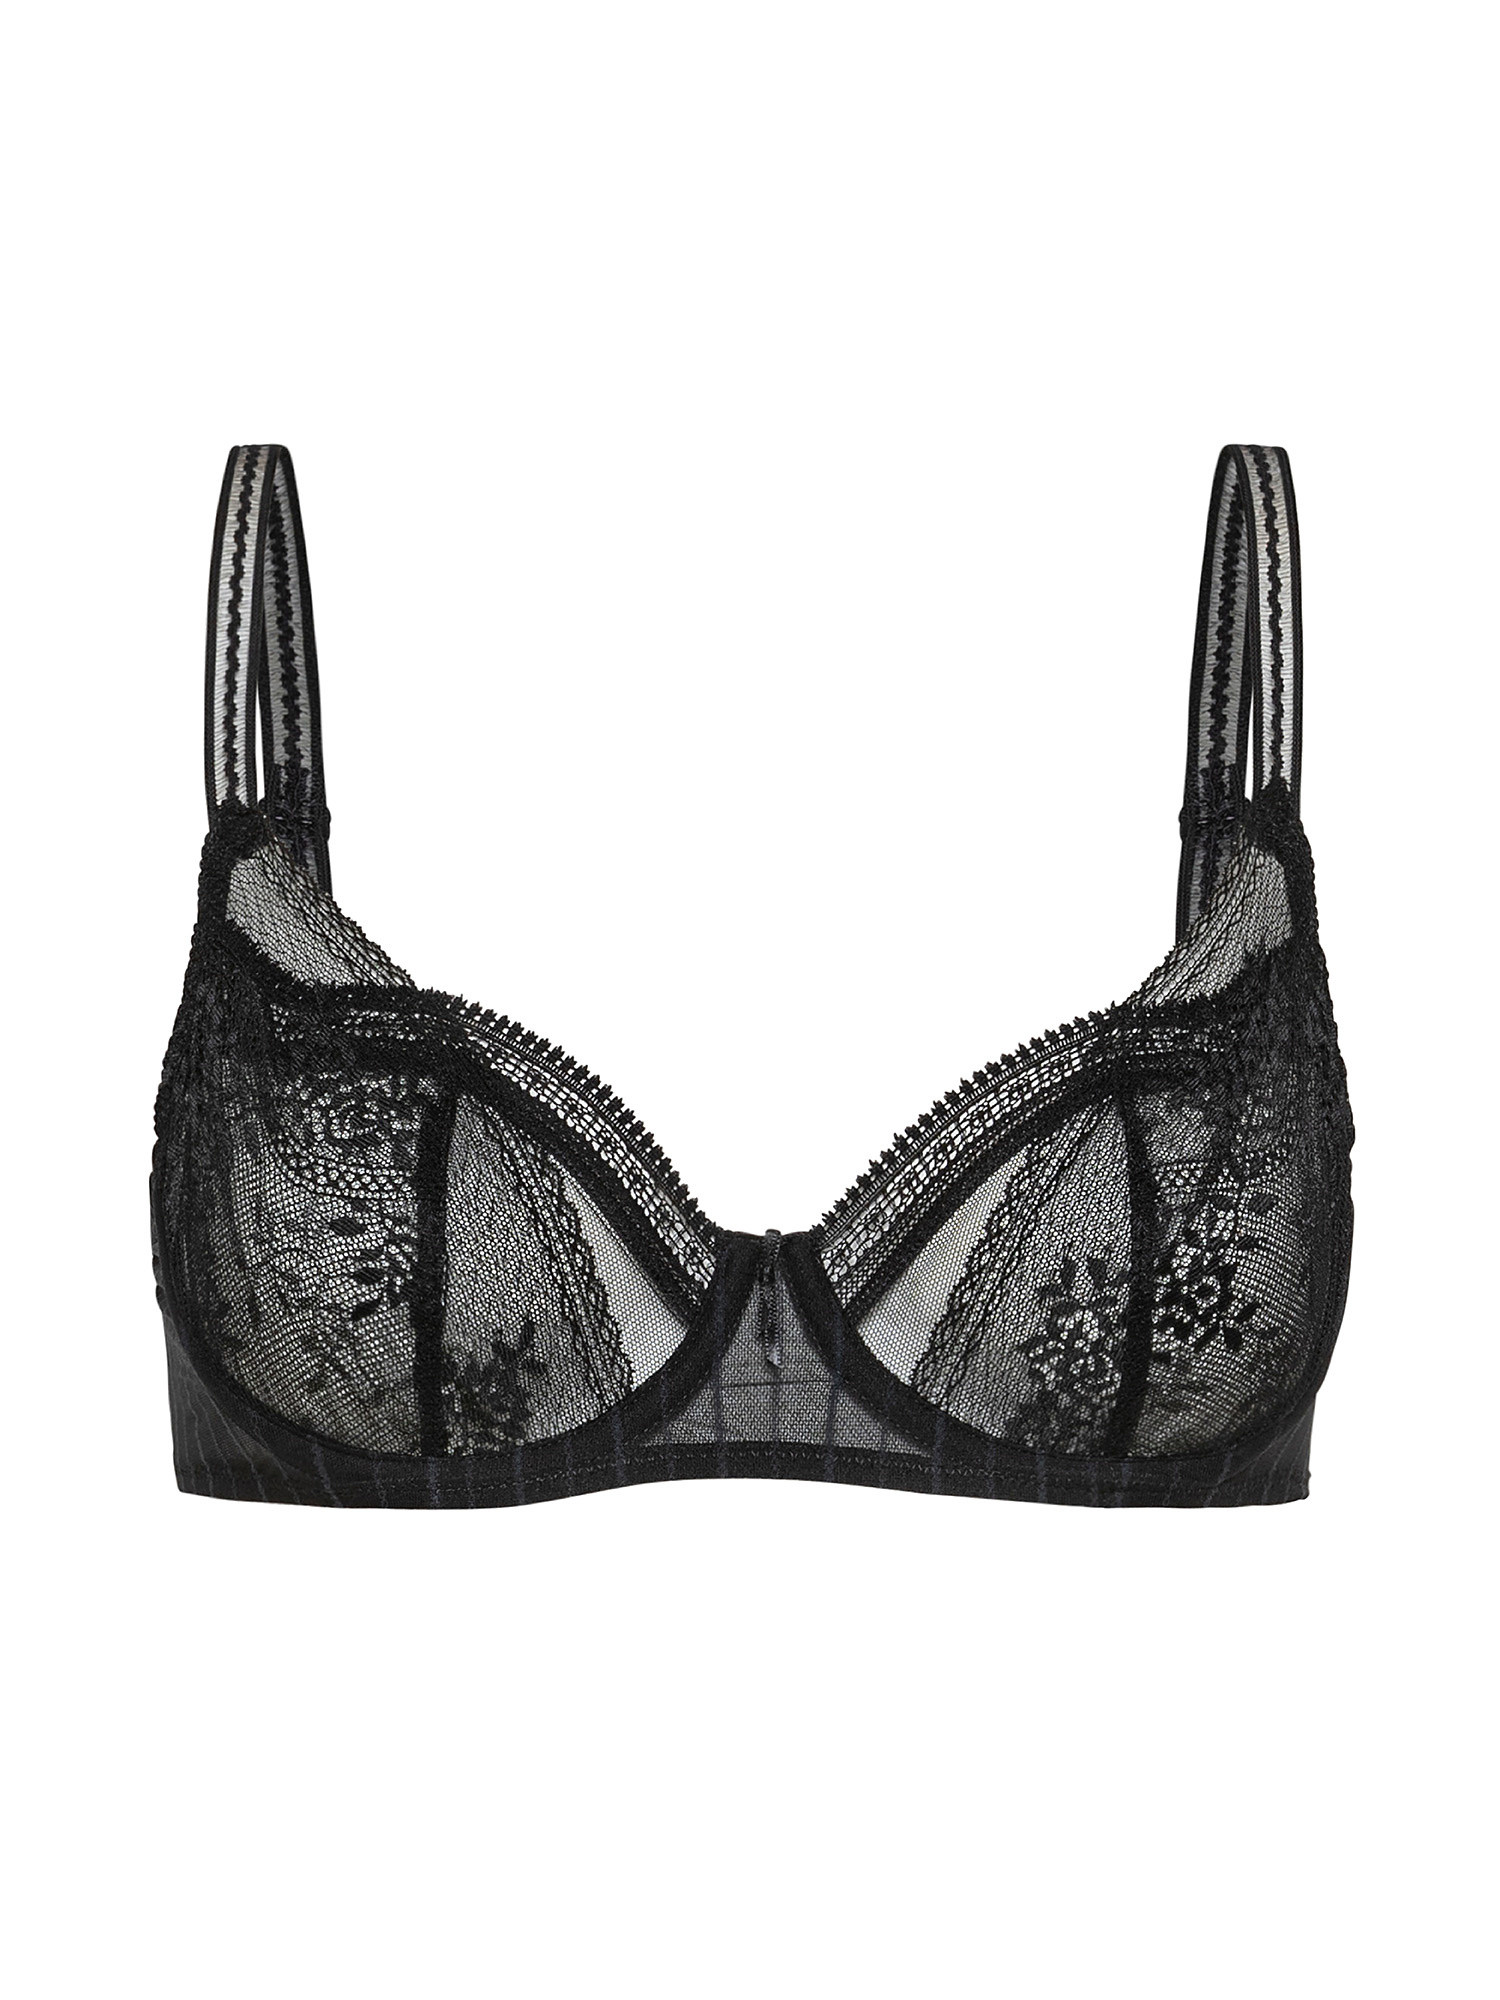 Balconette bra with floral lace, Black, large image number 0